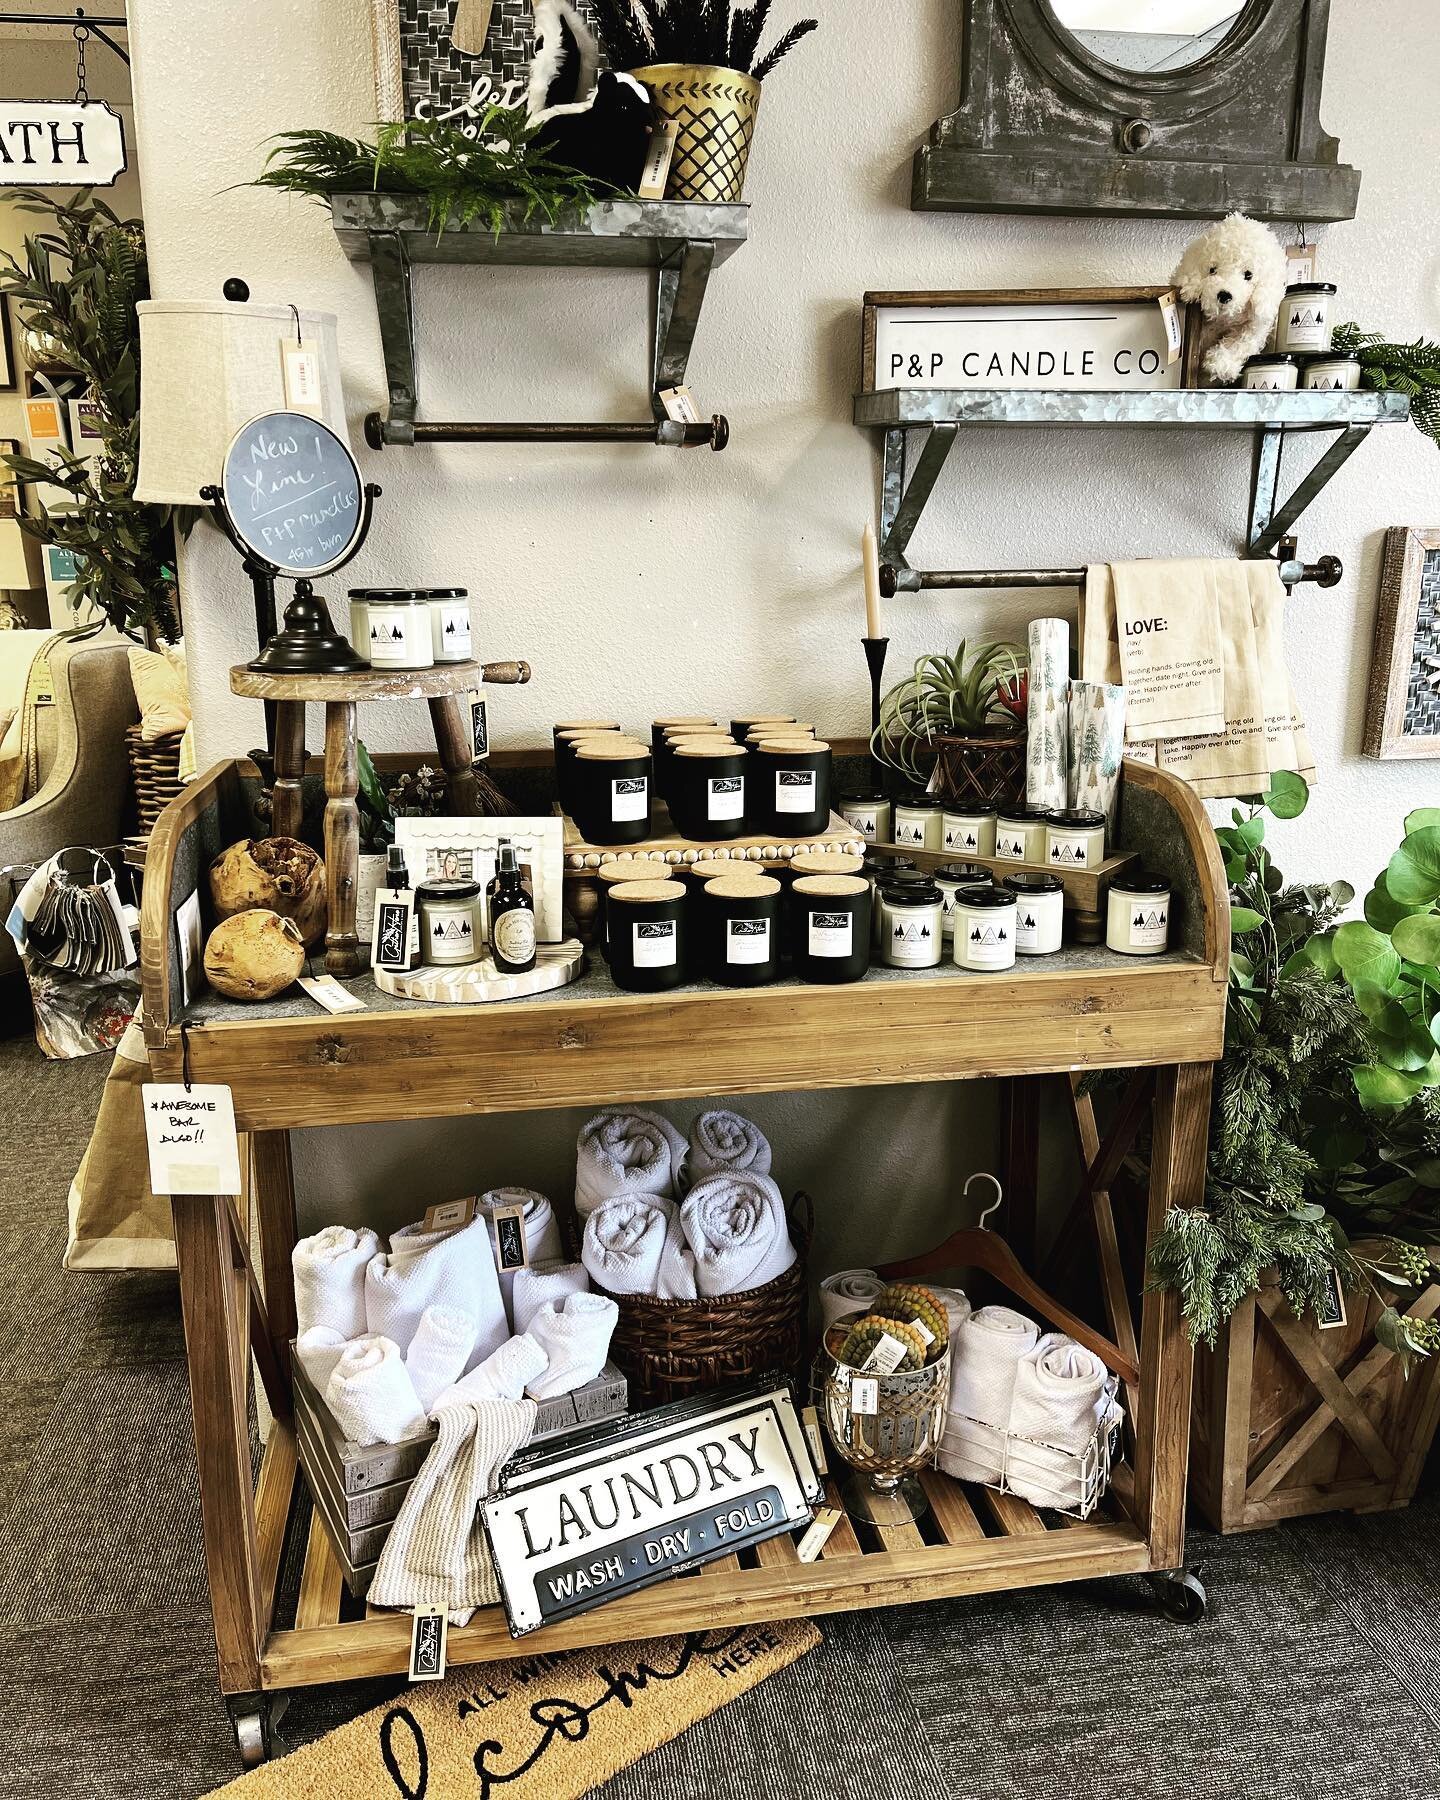 Looking so good In Chester Ca. ! ❤️
Love seeing how our accounts display our 🕯 candles. Check out this cute store!! @gatherhome.shop 
.
#chester 
#shopsmall 
#boutiqueshopping 
#lakealmanor 
#homedecor 
#interiordesign 
#lake 
#almanor 
#soycandles 